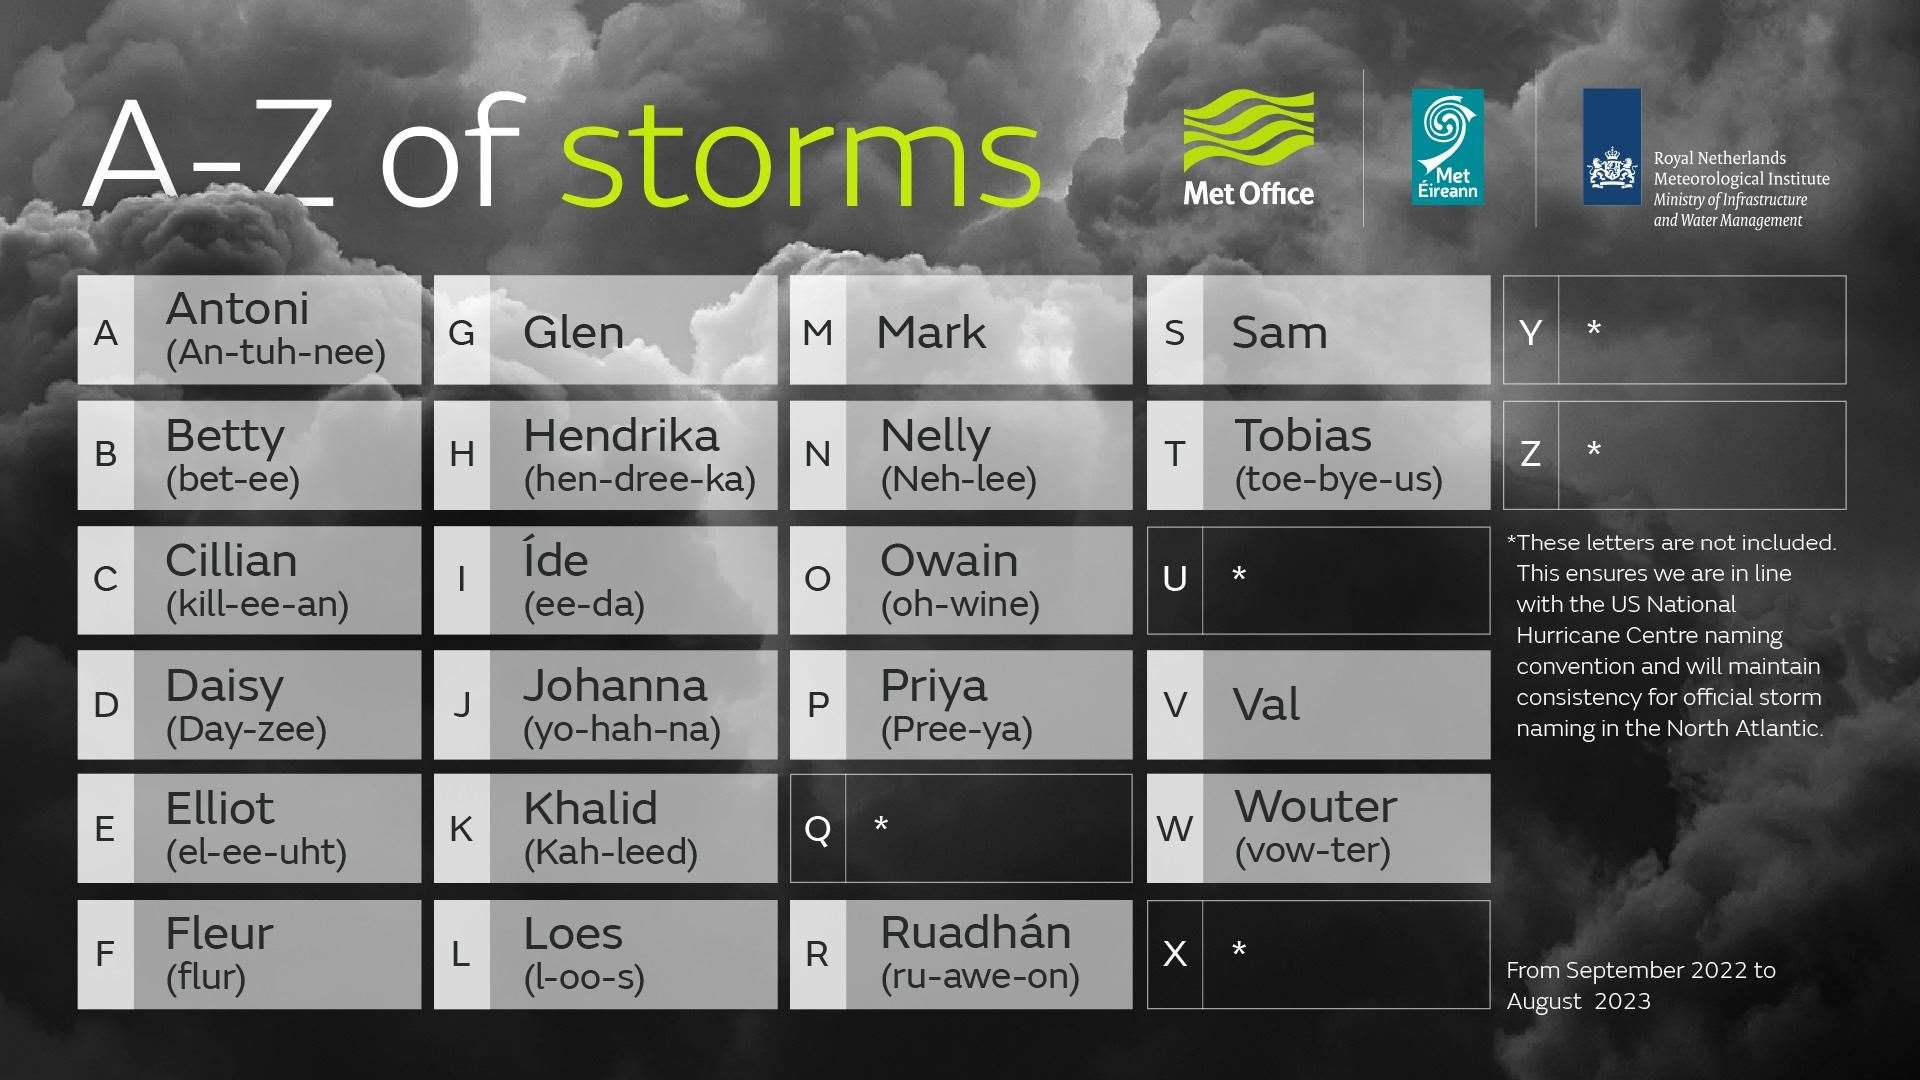 The storms for 2022/23 have now been named.